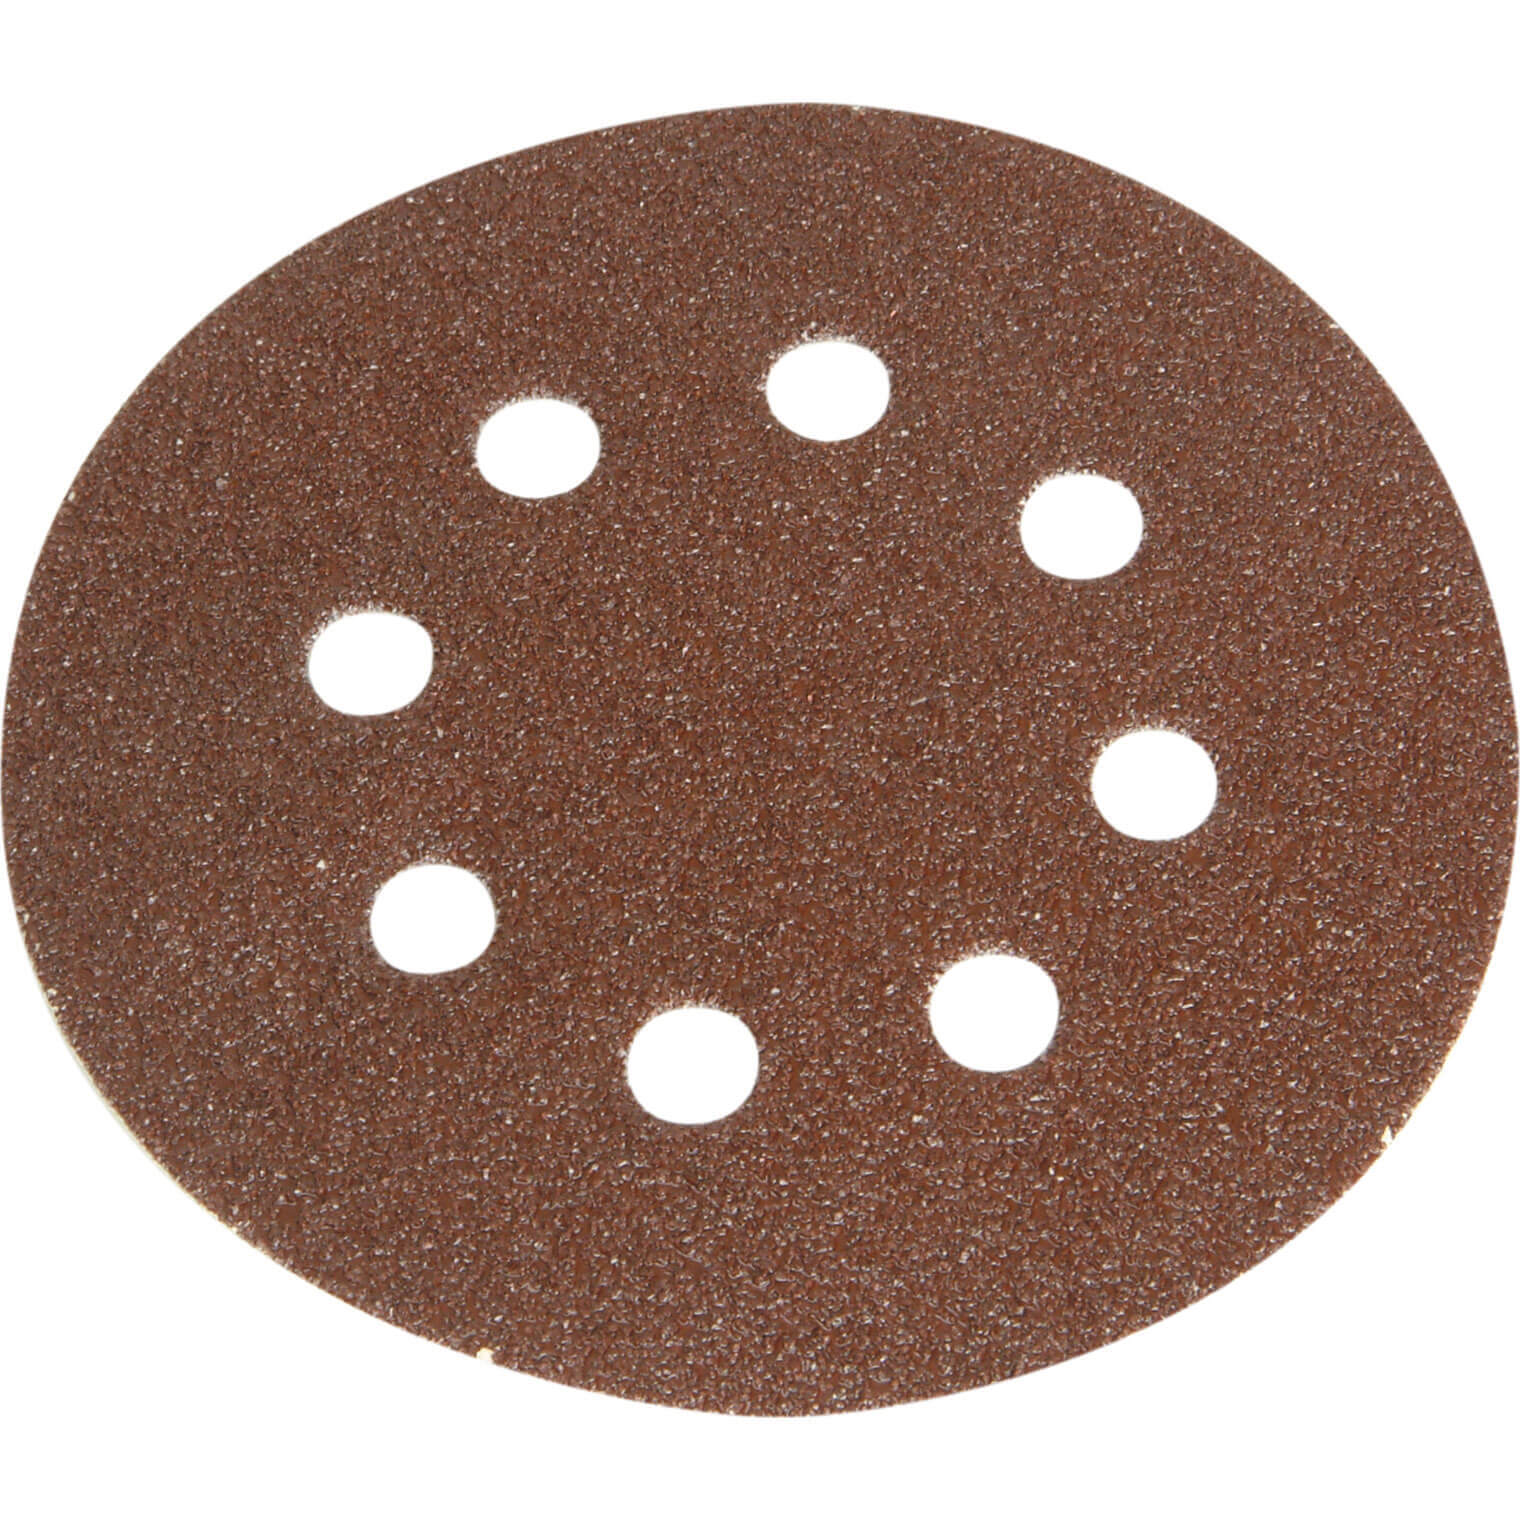 Photo of Faithfull 125mm Hook And Loop Perforated Sanding Discs 125mm Medium Fine Pack Of 5